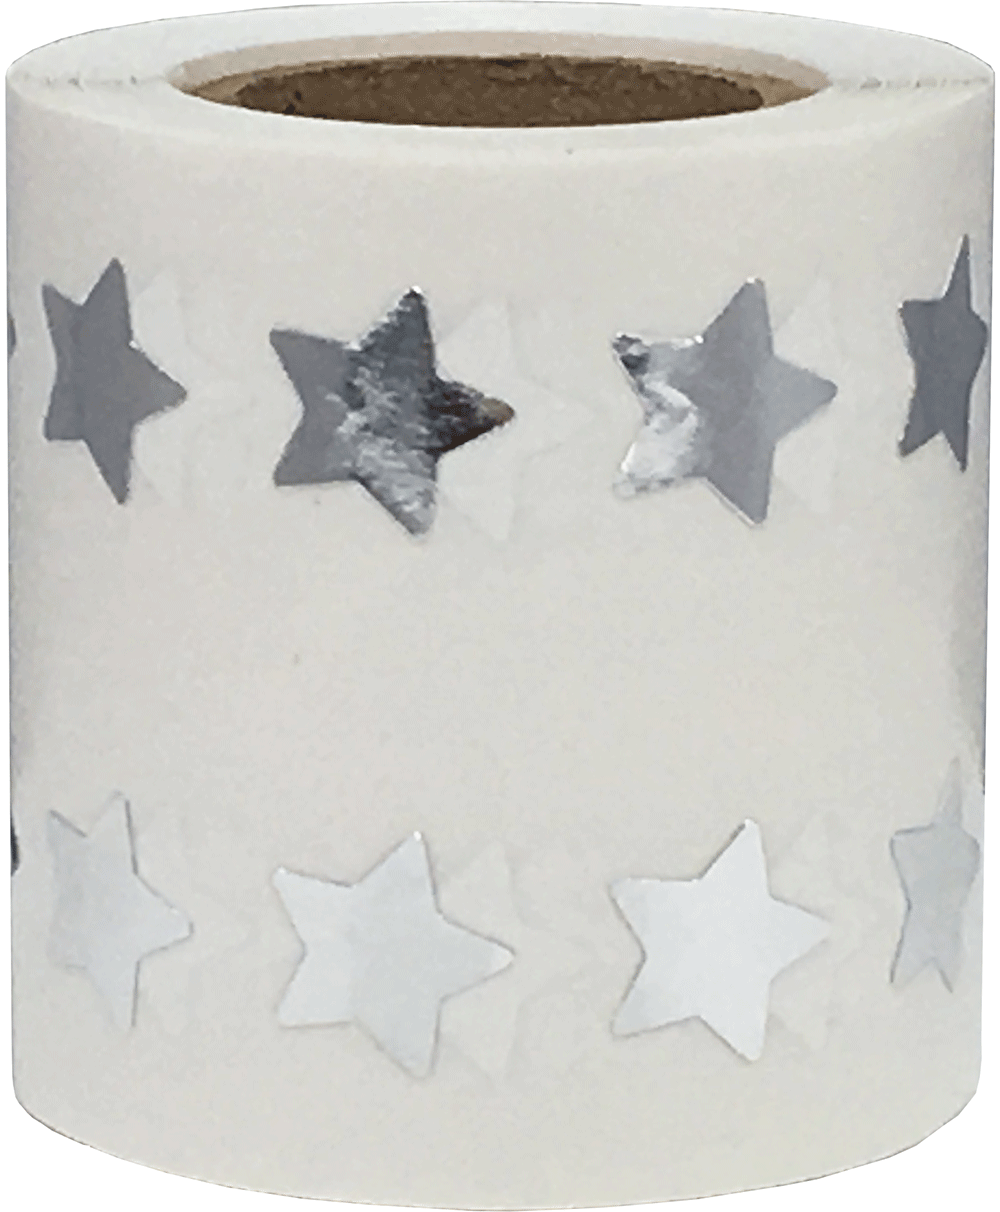 Metallic Silver Star Stickers, 1/2 Inch Wide, 1000 Labels on a